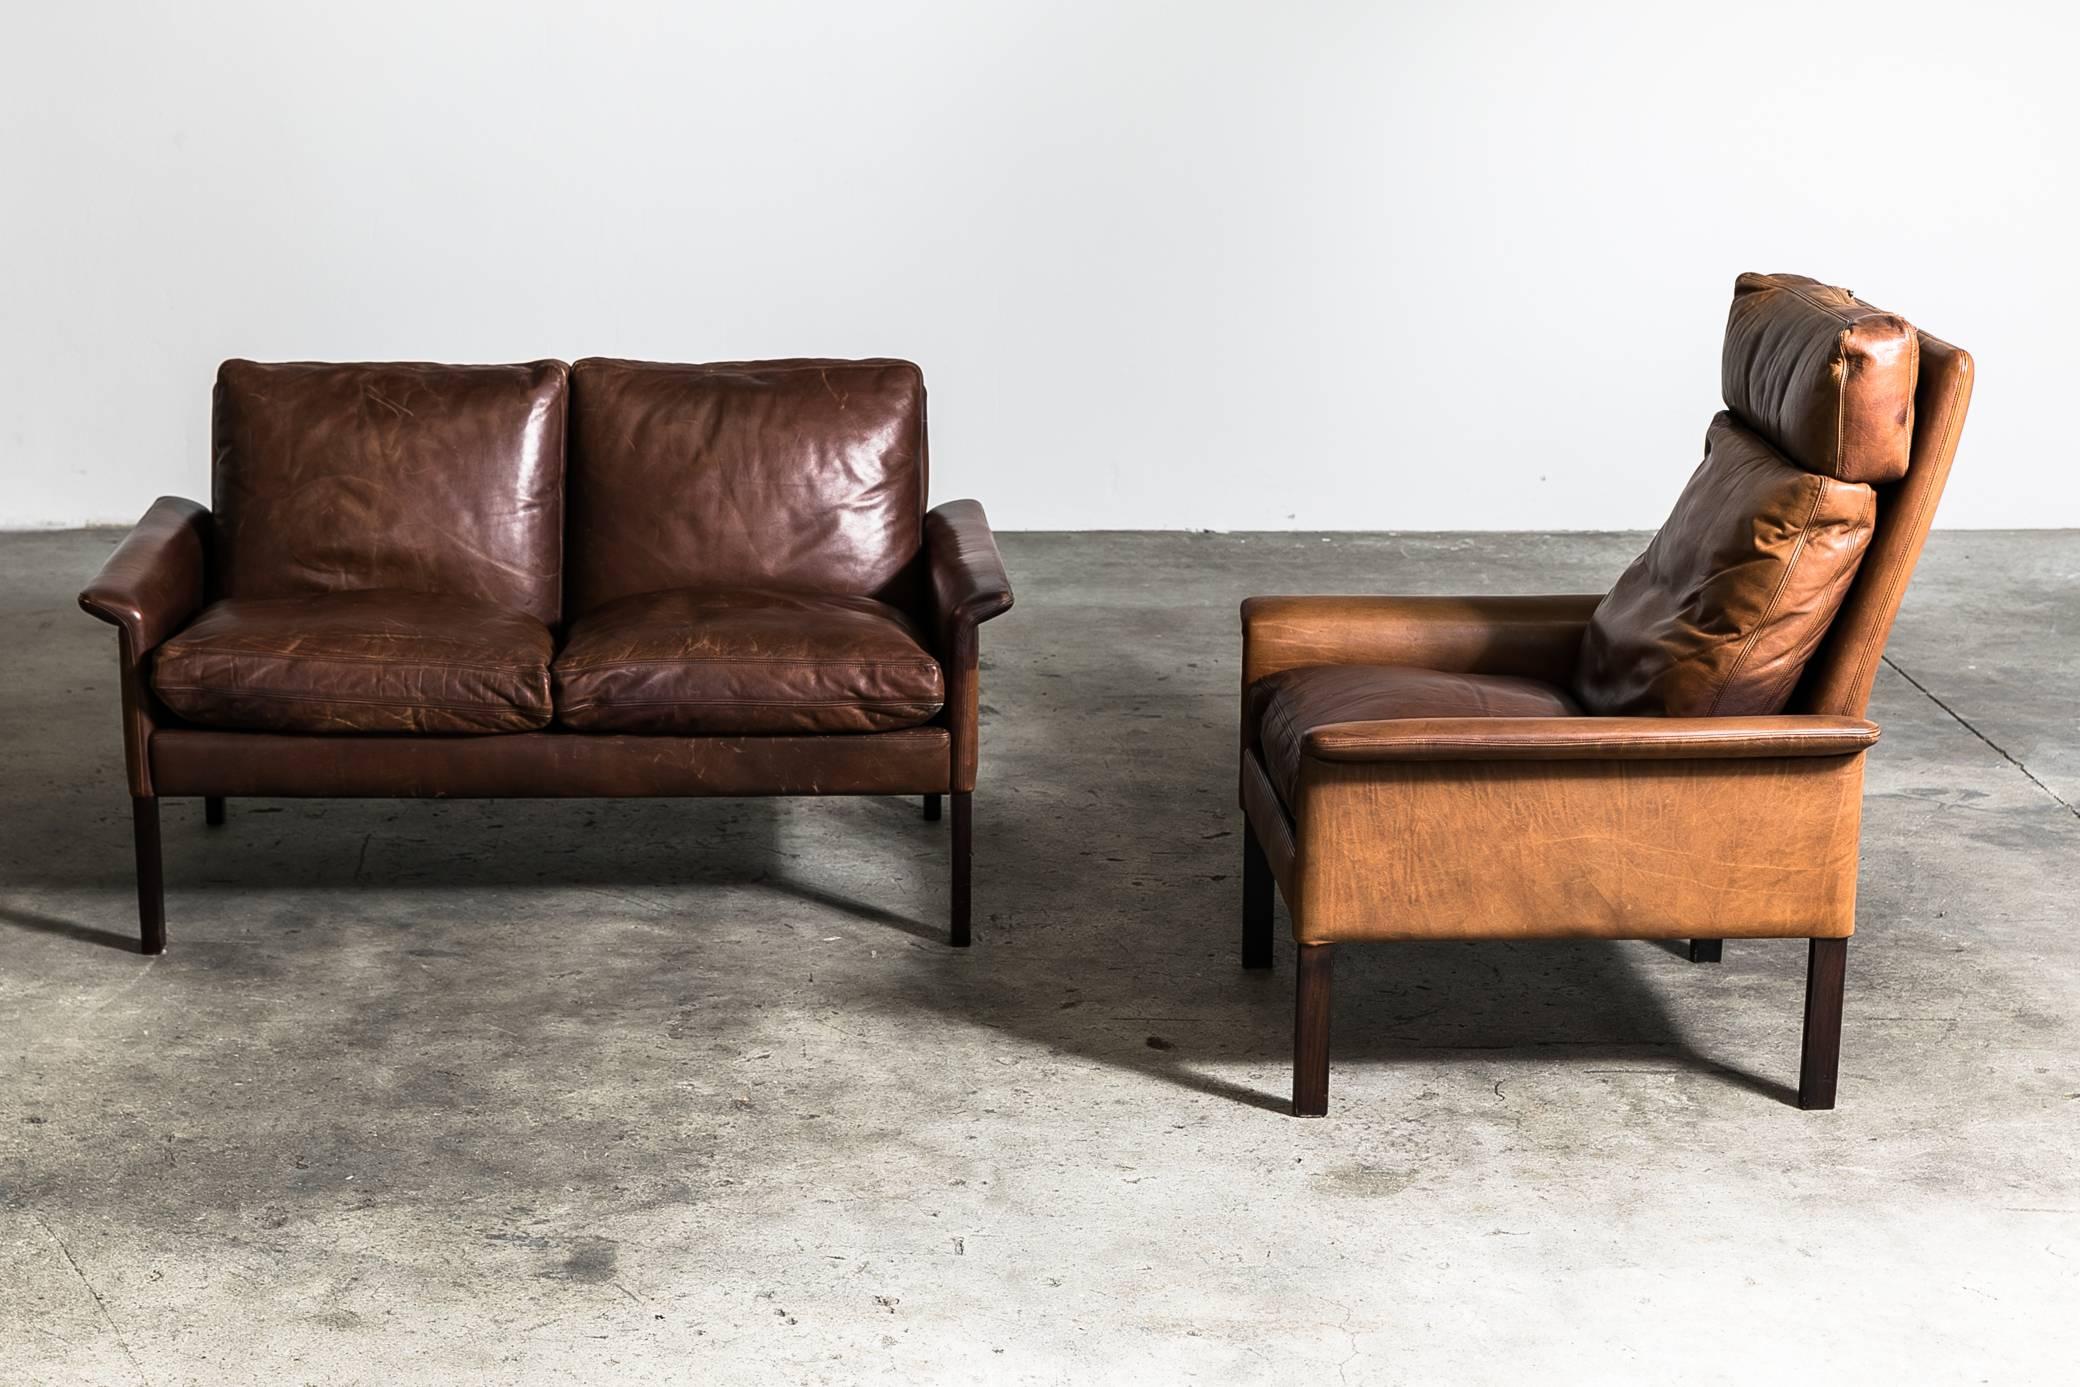 Danish sofa set of two-seat and armchair designed by Hans Olsen for C/S Mobler in 1969. Very good condition and original leather upholstery with beautiful patina. Rosewood leg and feather cushion. Dimensions: Sofa H 73cm x 130W x 80D. Chair: H 97cm